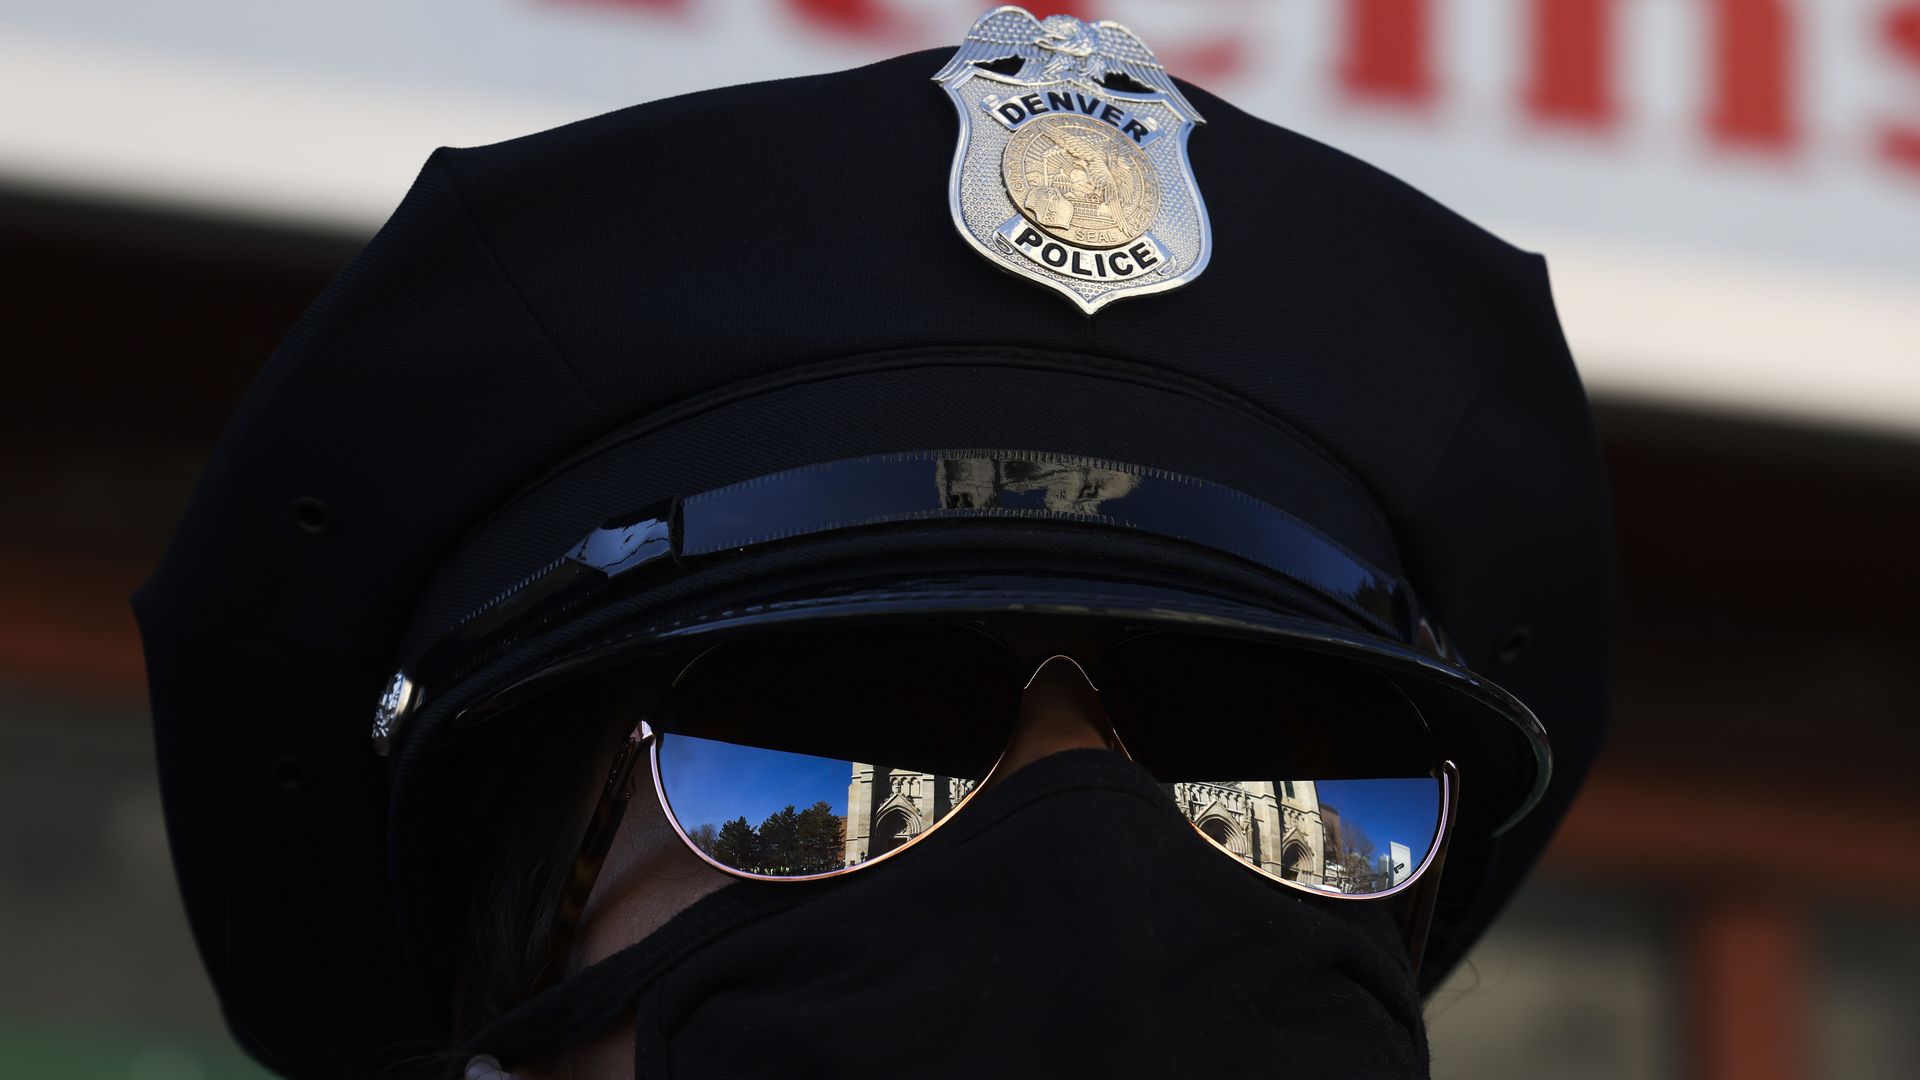 A close-up photo of a Denver police officer wearing a uniform hat, sunglasses and COVID-19 face mask.